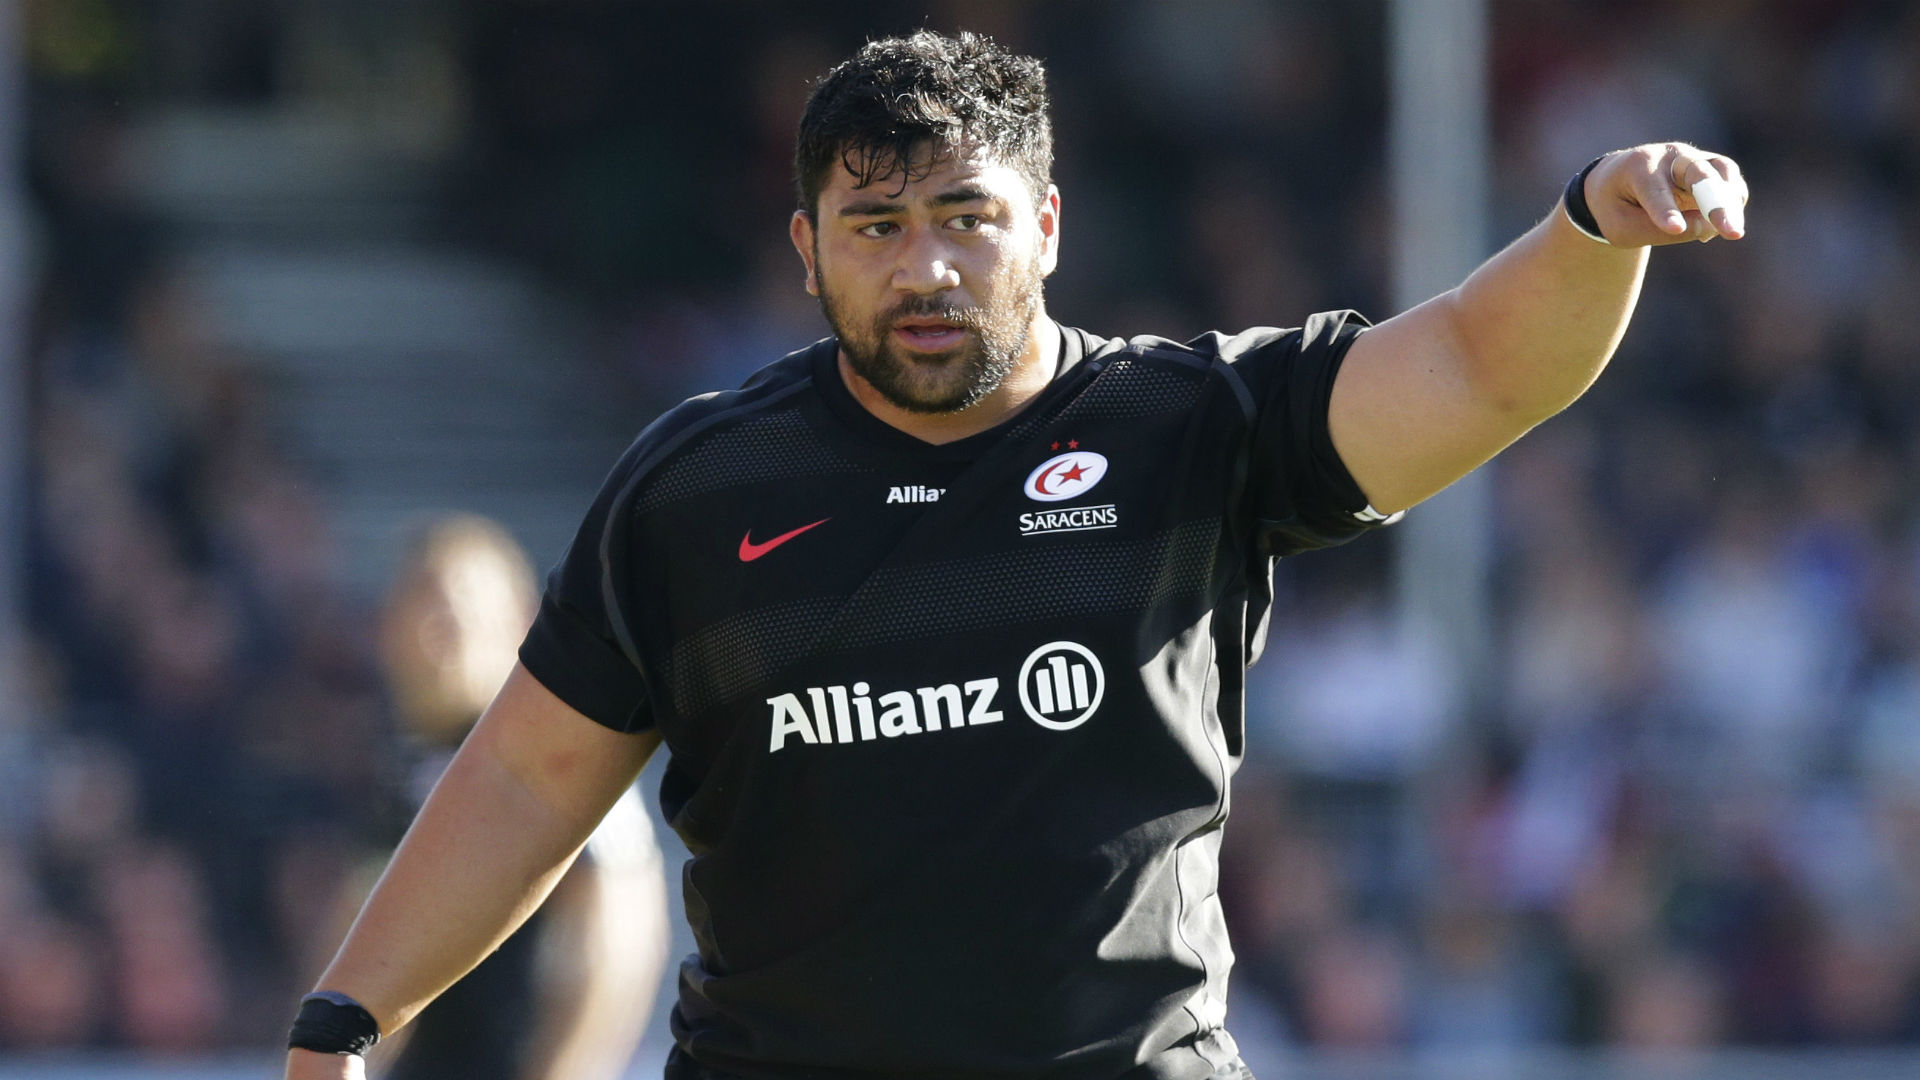 Saracens hit with misconduct complaint